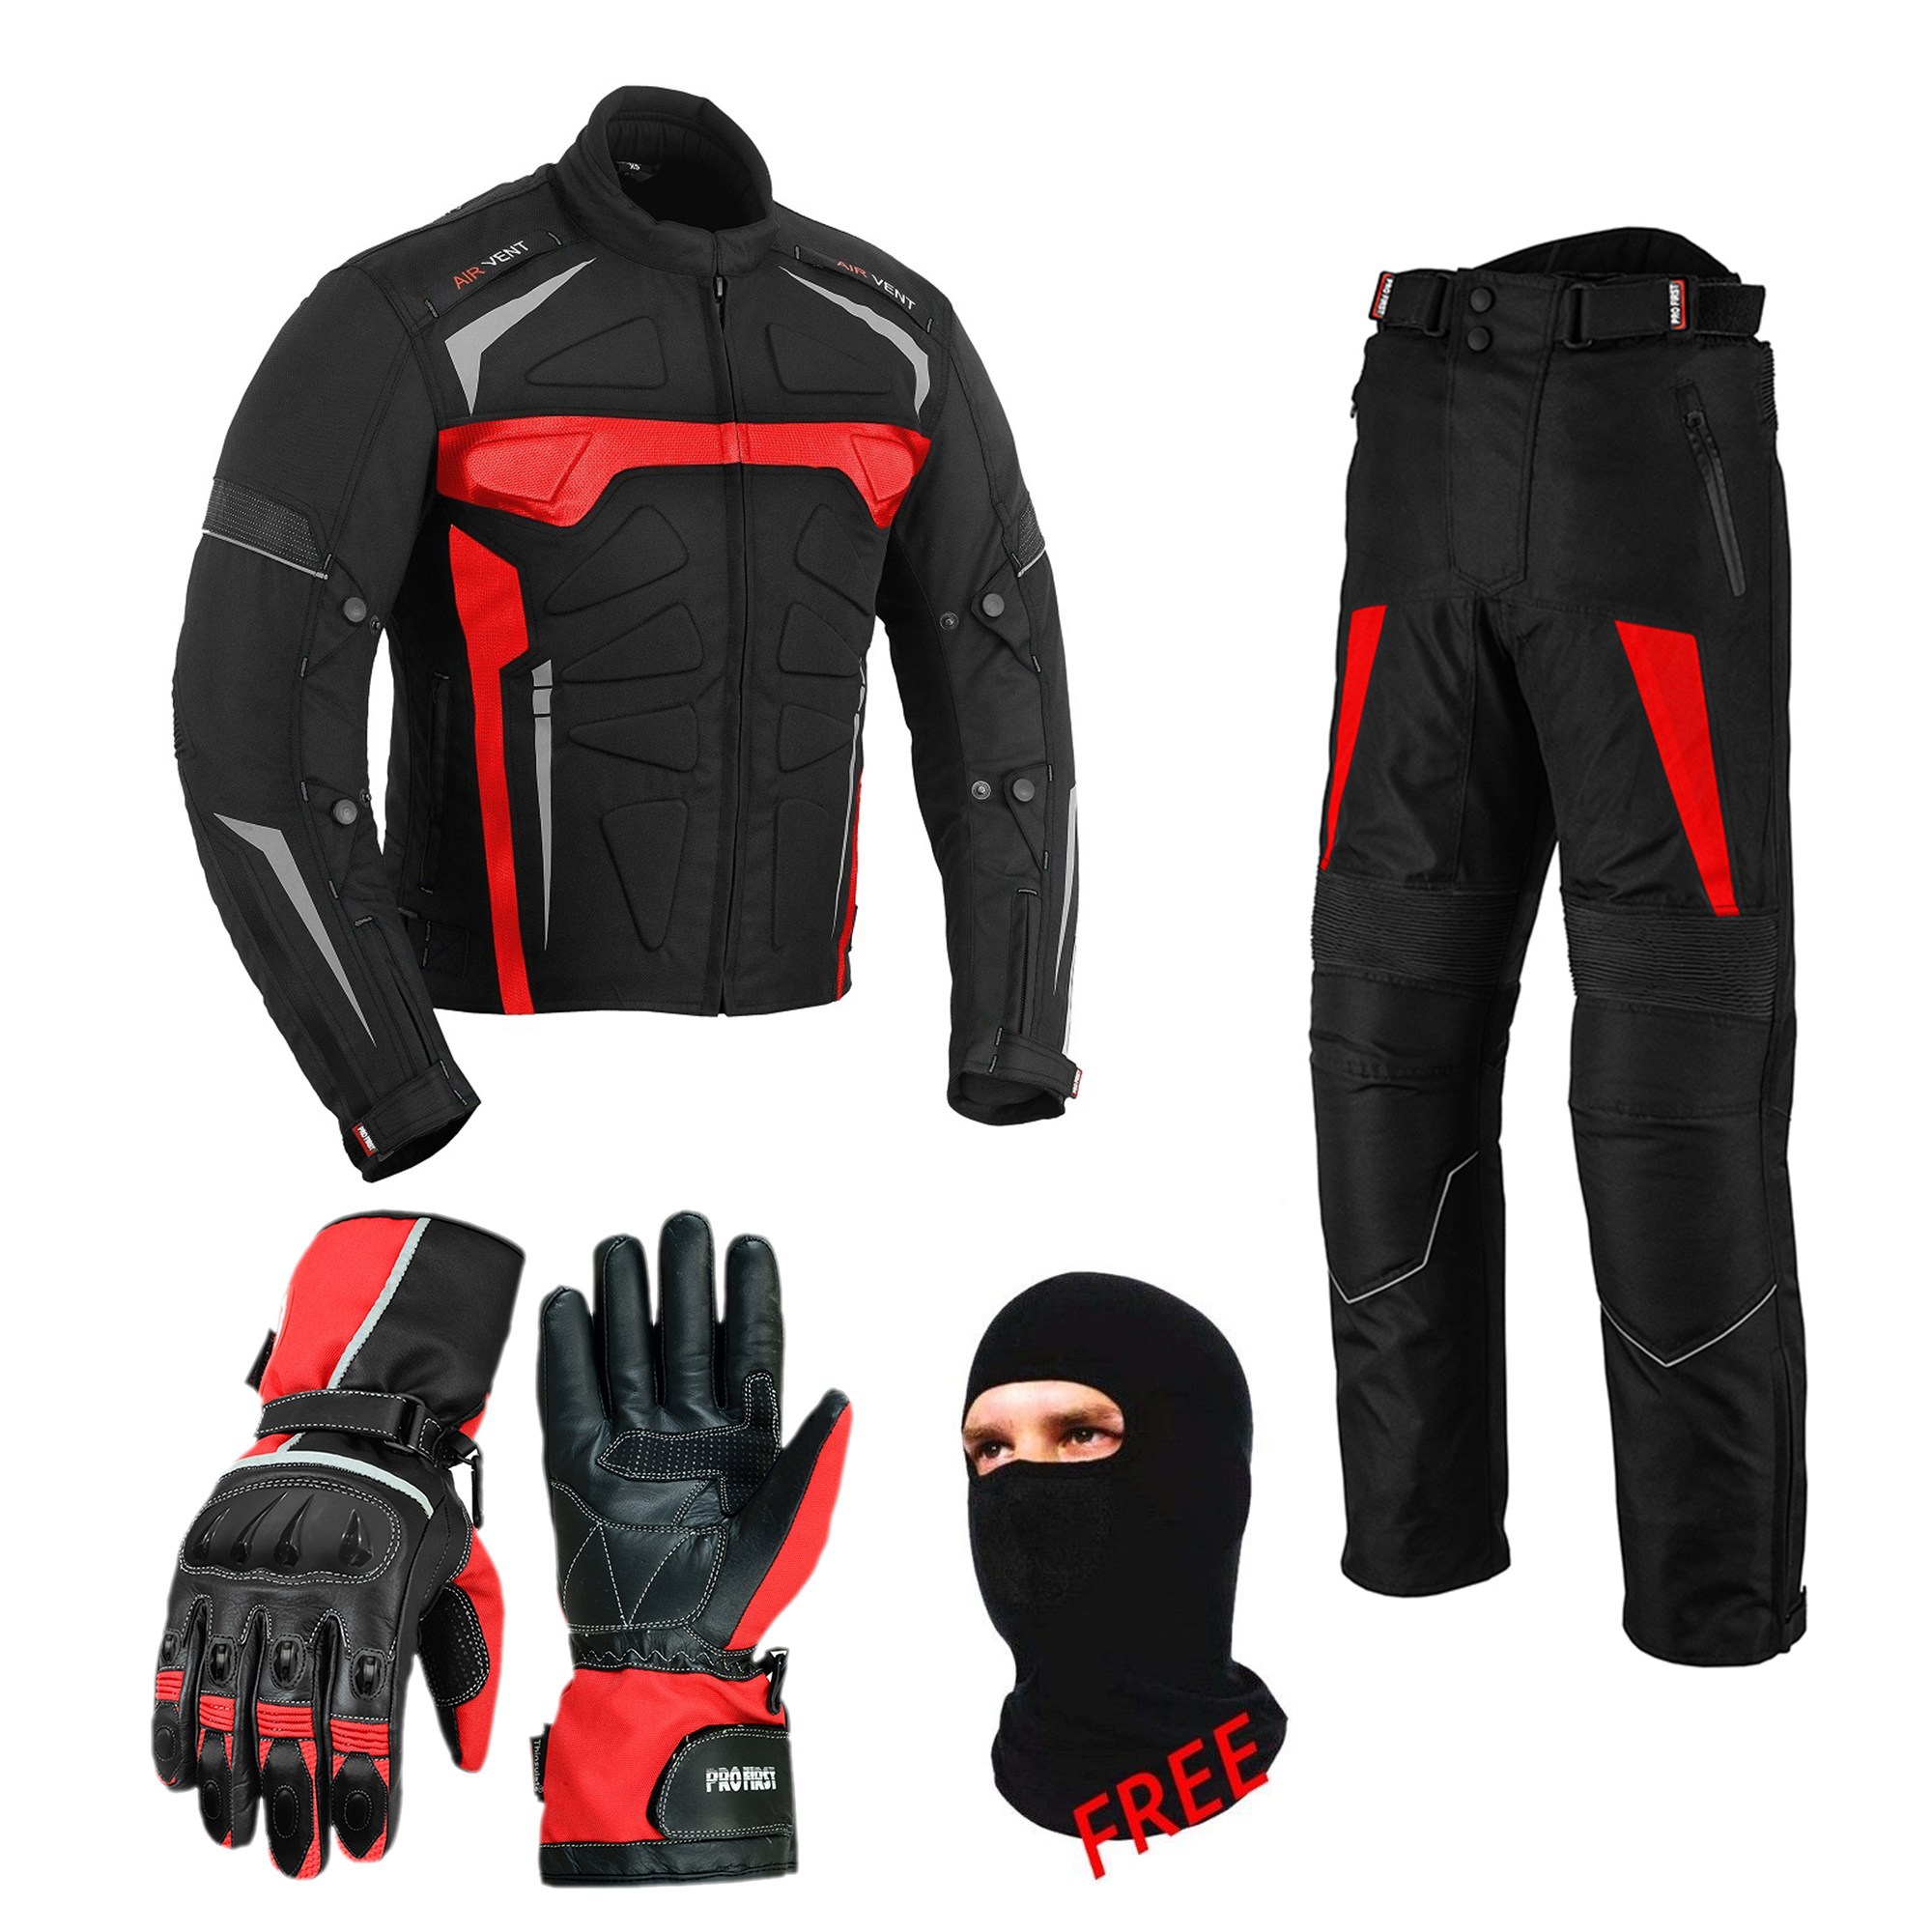 PROFIRST motorcycle suit & matching gloves (red) -MEGA DEALS (SETS)